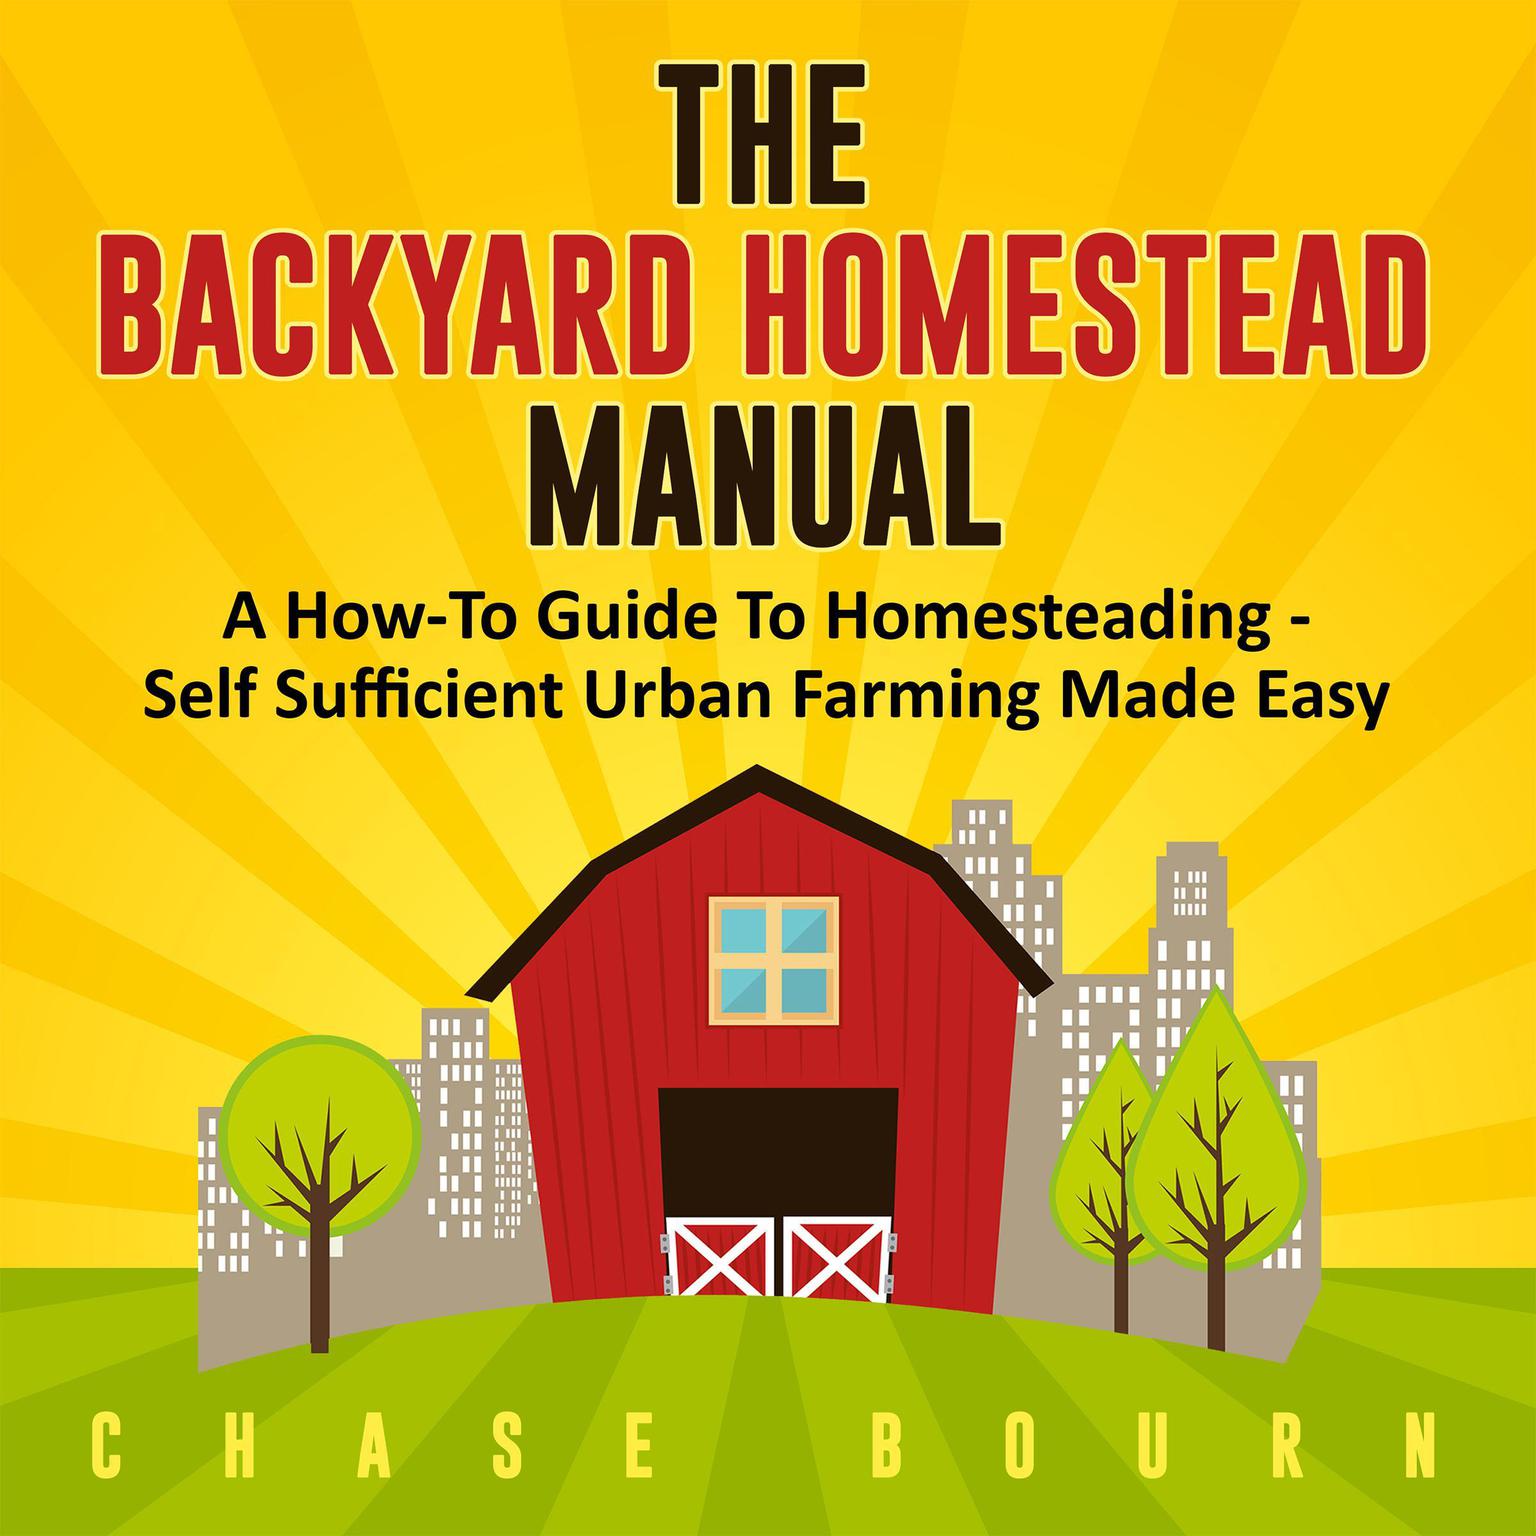 The Backyard Homestead Manual: A How-To Guide to Homesteading - Self Sufficient Urban Farming Made Easy: A How-To Guide to Homesteading - Self Sufficient Urban Farming Made Easy Audiobook, by Chase Bourn